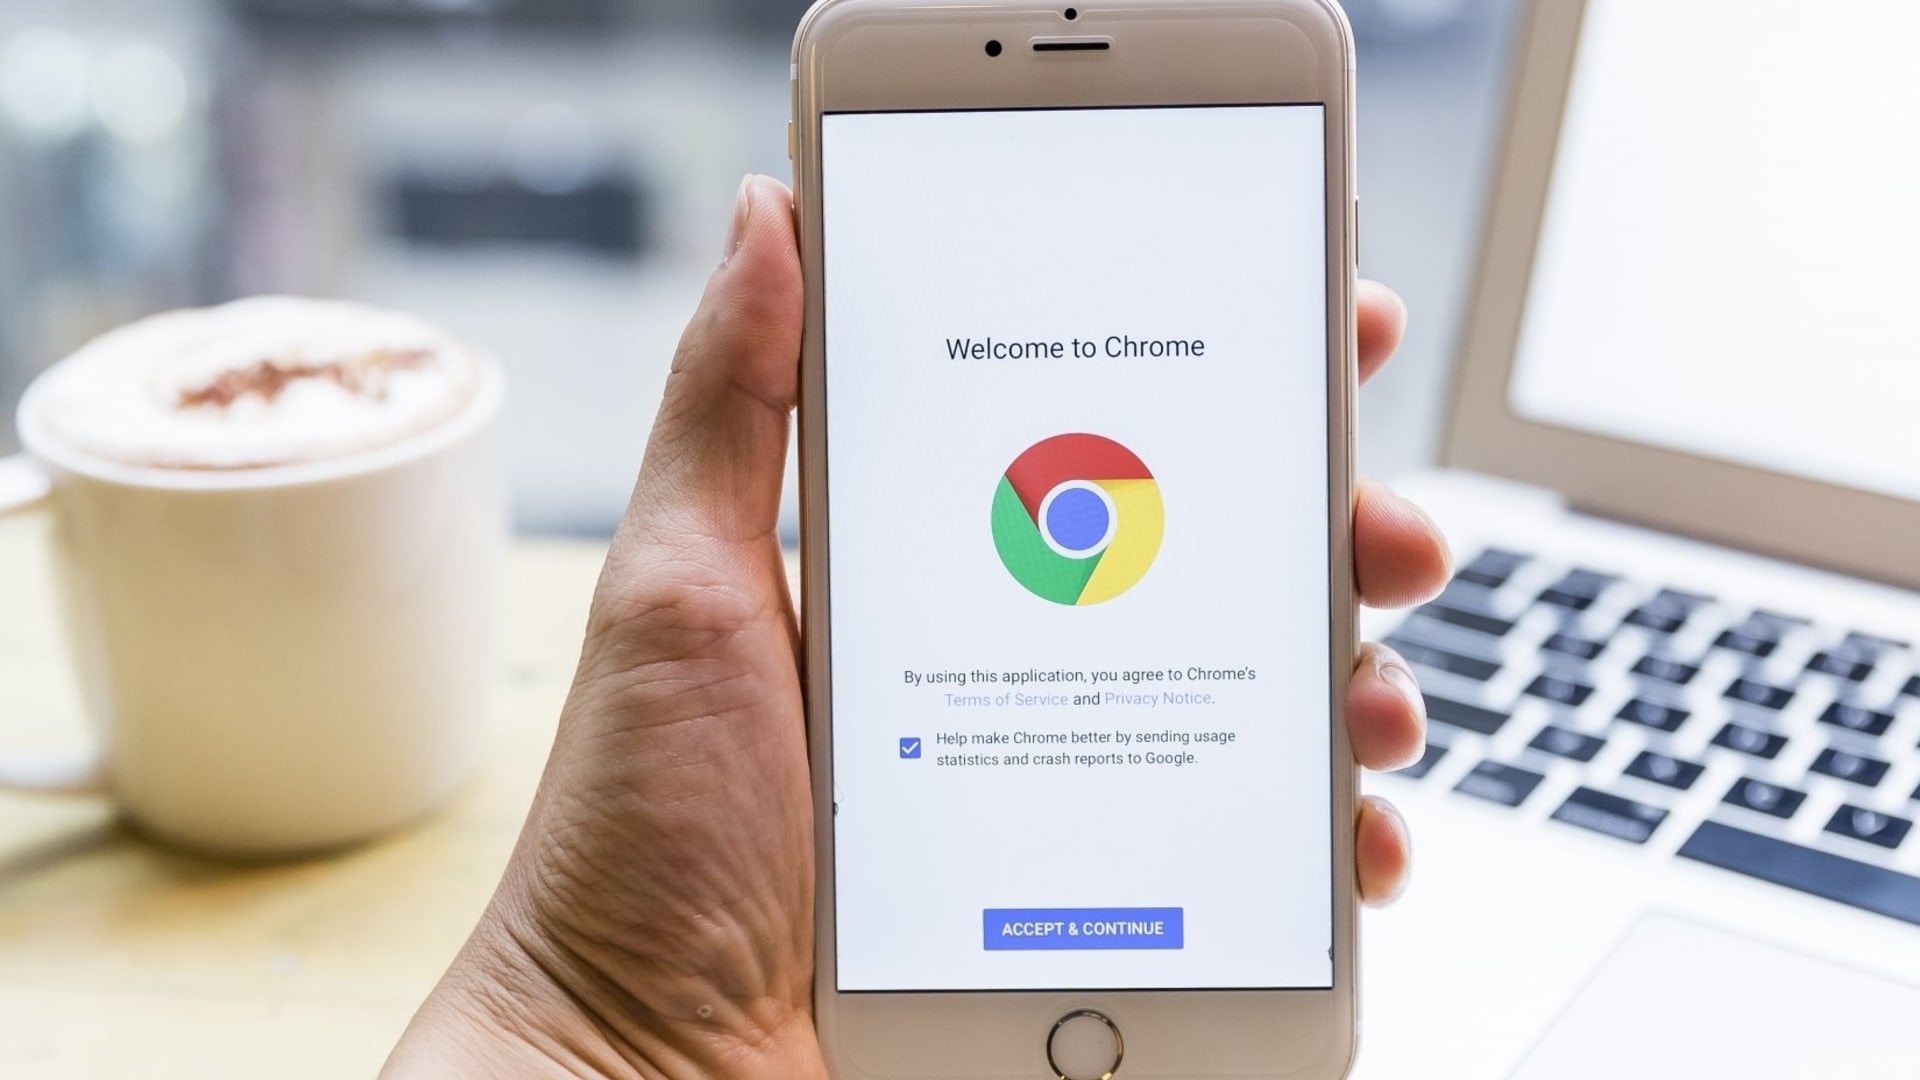 Google Chrome Security Problem Allows Spying on Millions of Users